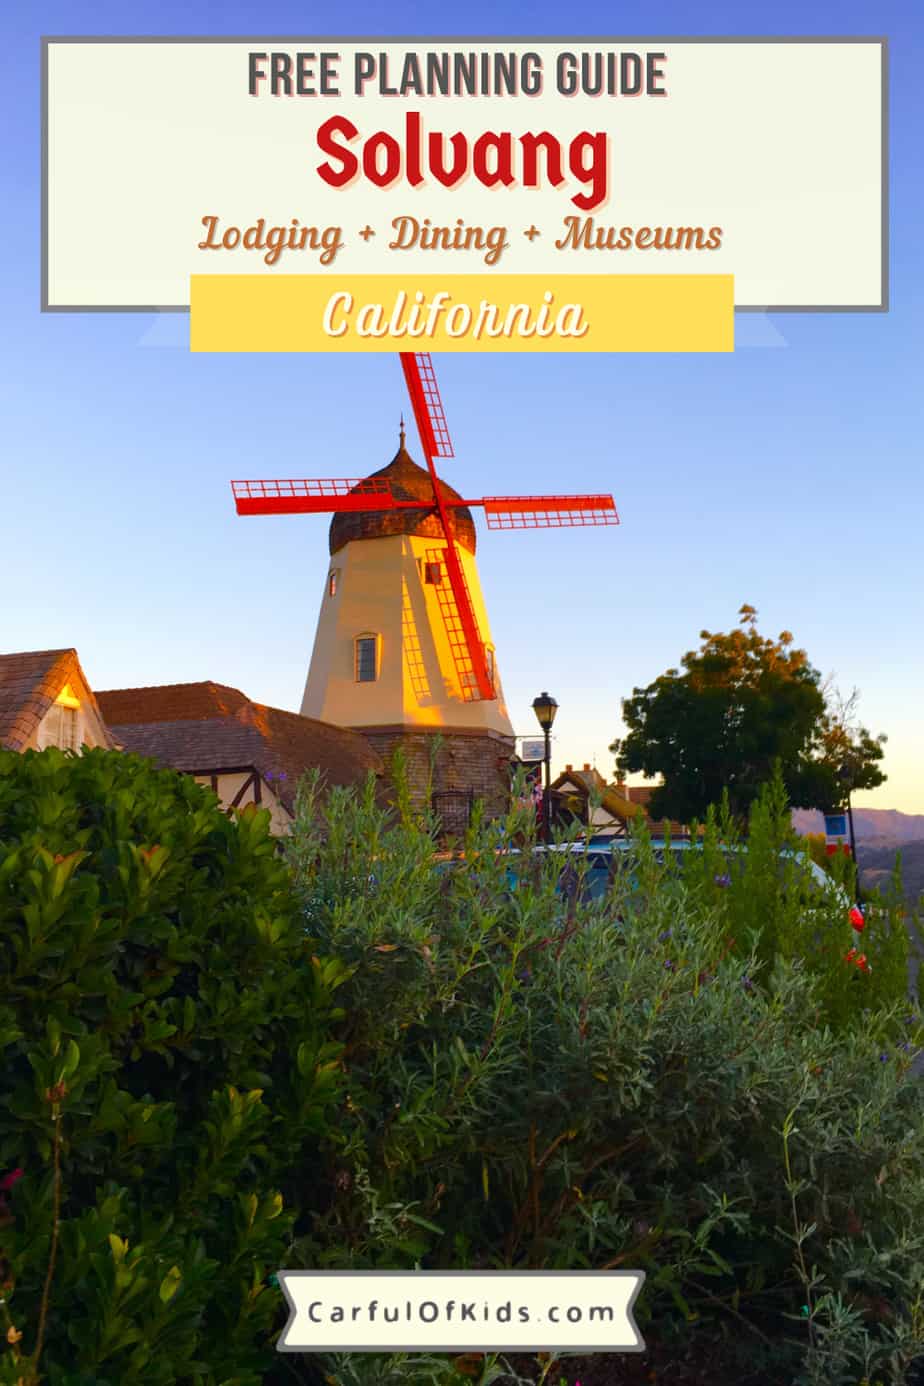 Stroll down the charming streets of Solvang, California, and find traditional bakeries and monuments from the old country--Denmark. Browse for clogs or taste the richness of the region at local tasting rooms and bakeries on your next getaway to the Central California Coast. Weekend getaways from Southern California | What to do in Solvang | The little Denmark of California #California #Solvang